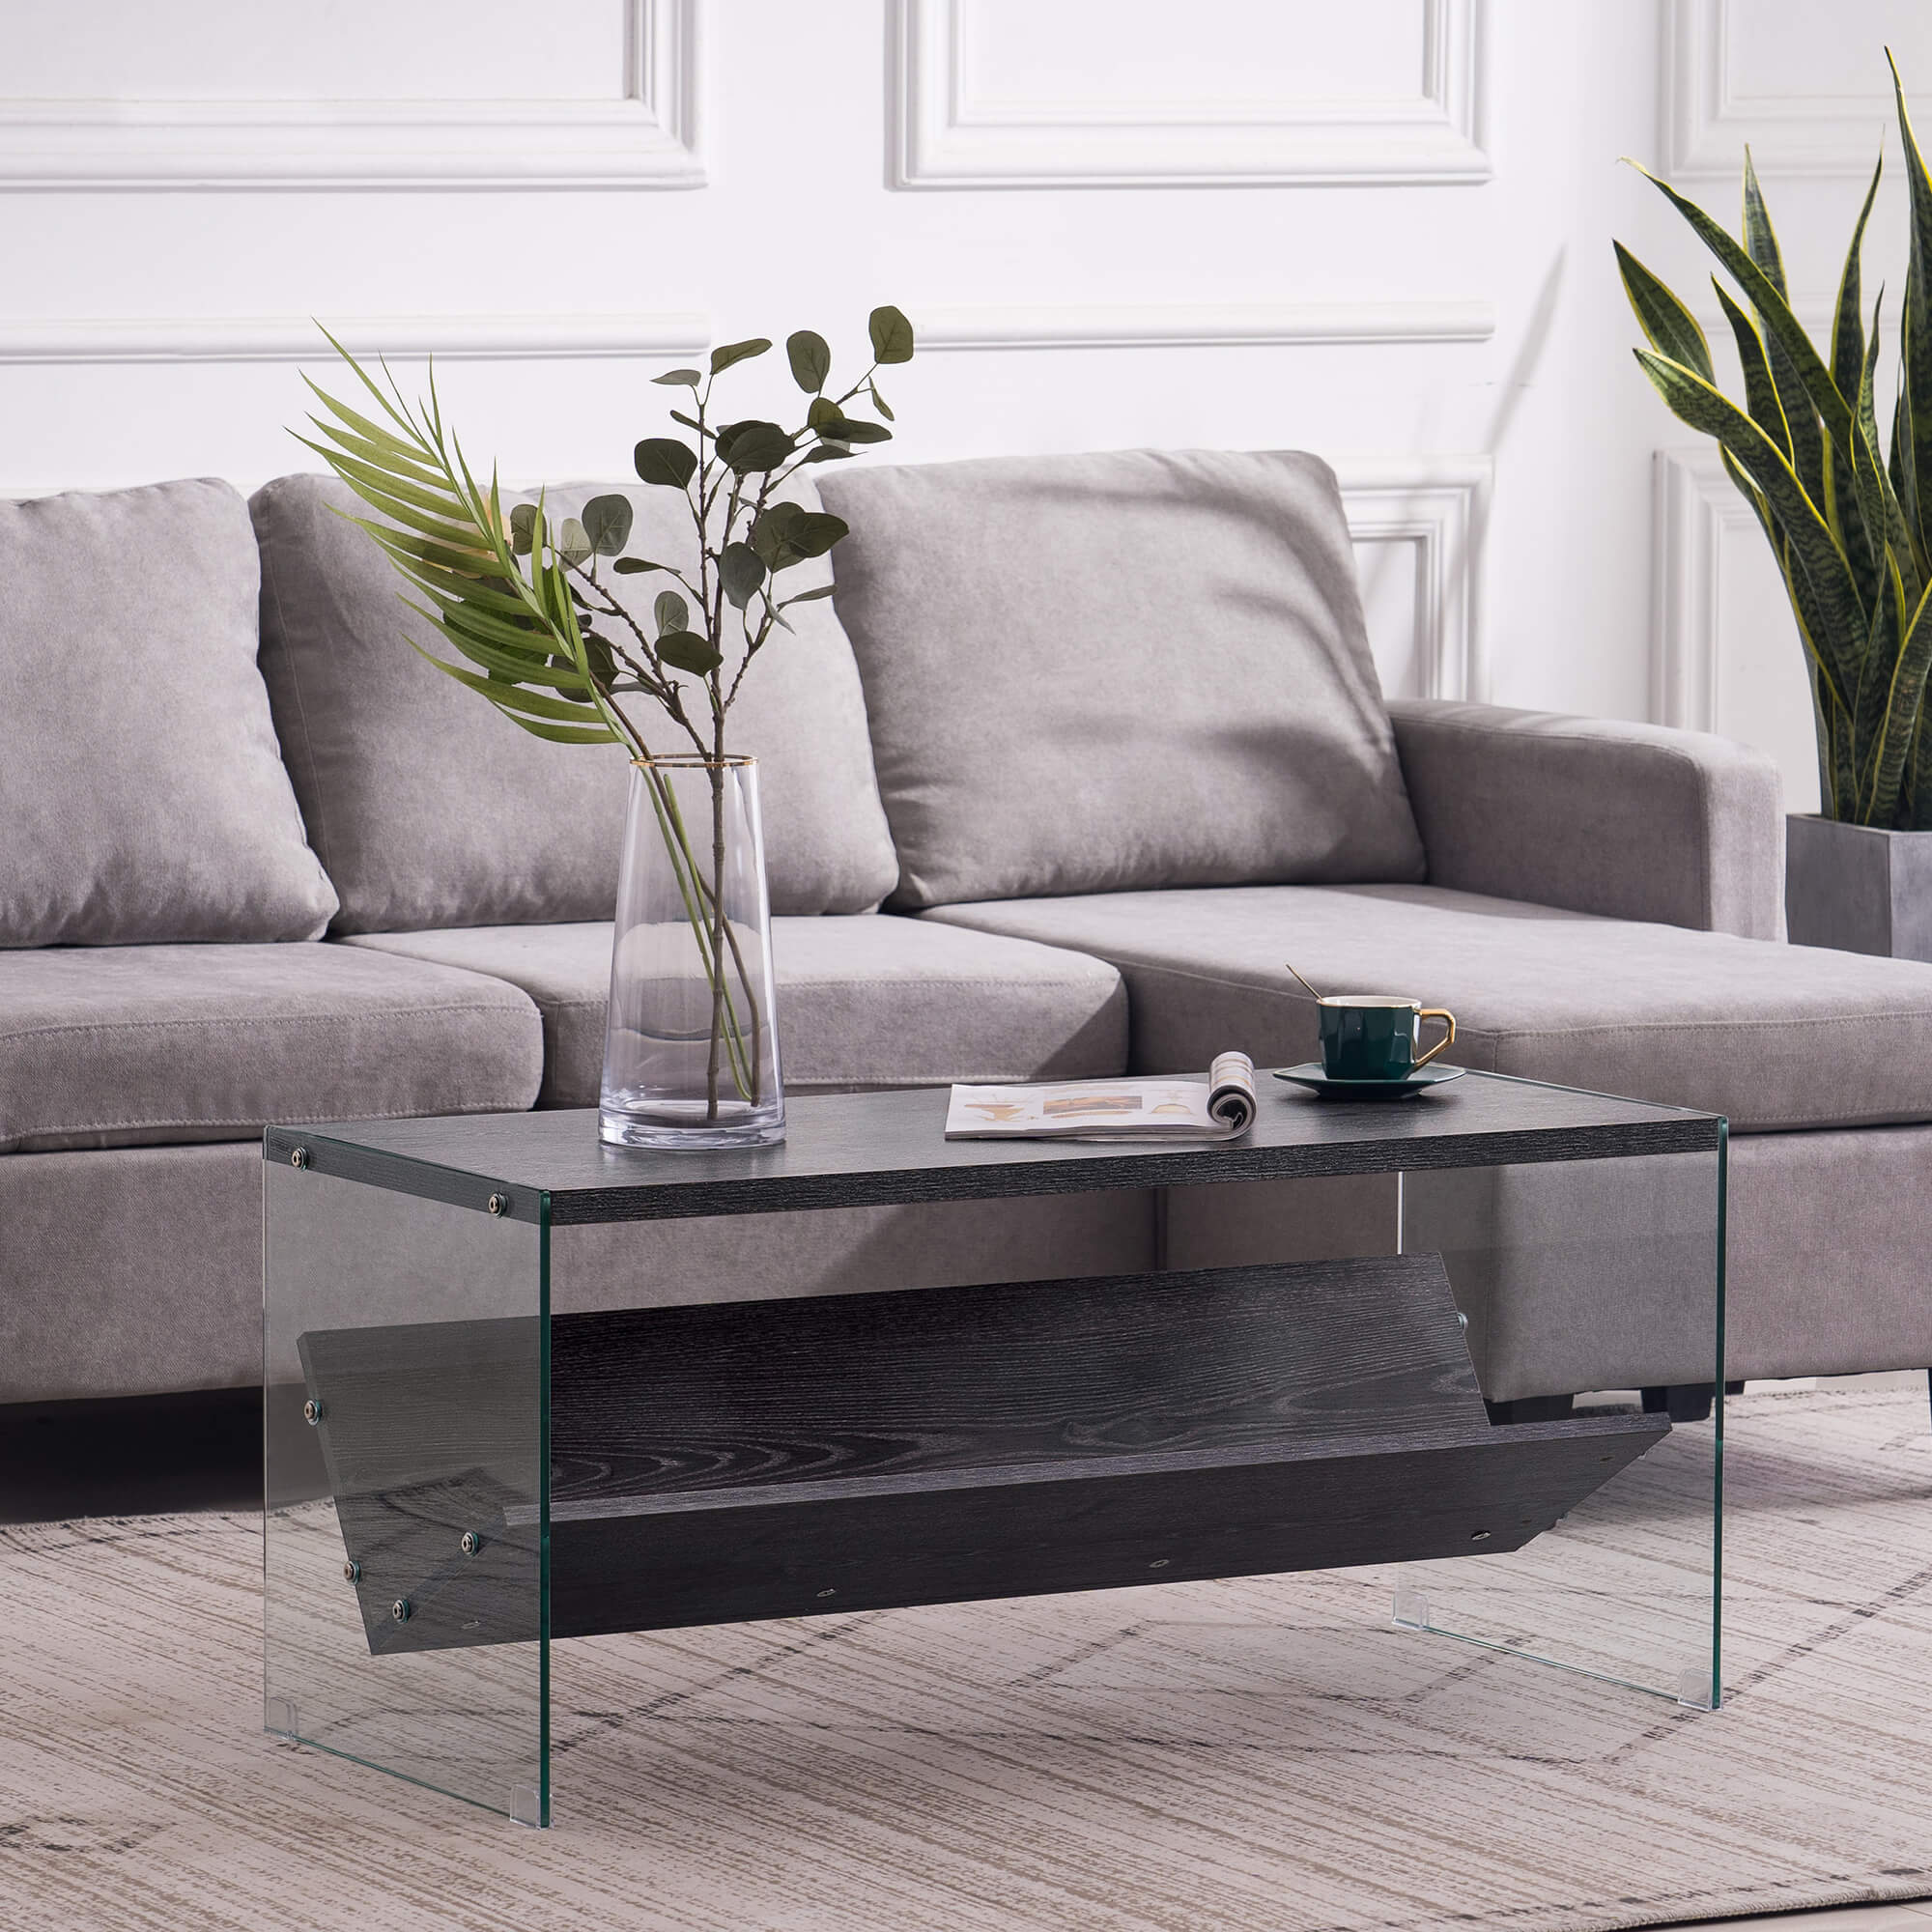 Ivinta Modern Glass Coffee Table，Small Cocktail Table with Storage Shelf - Ivinta